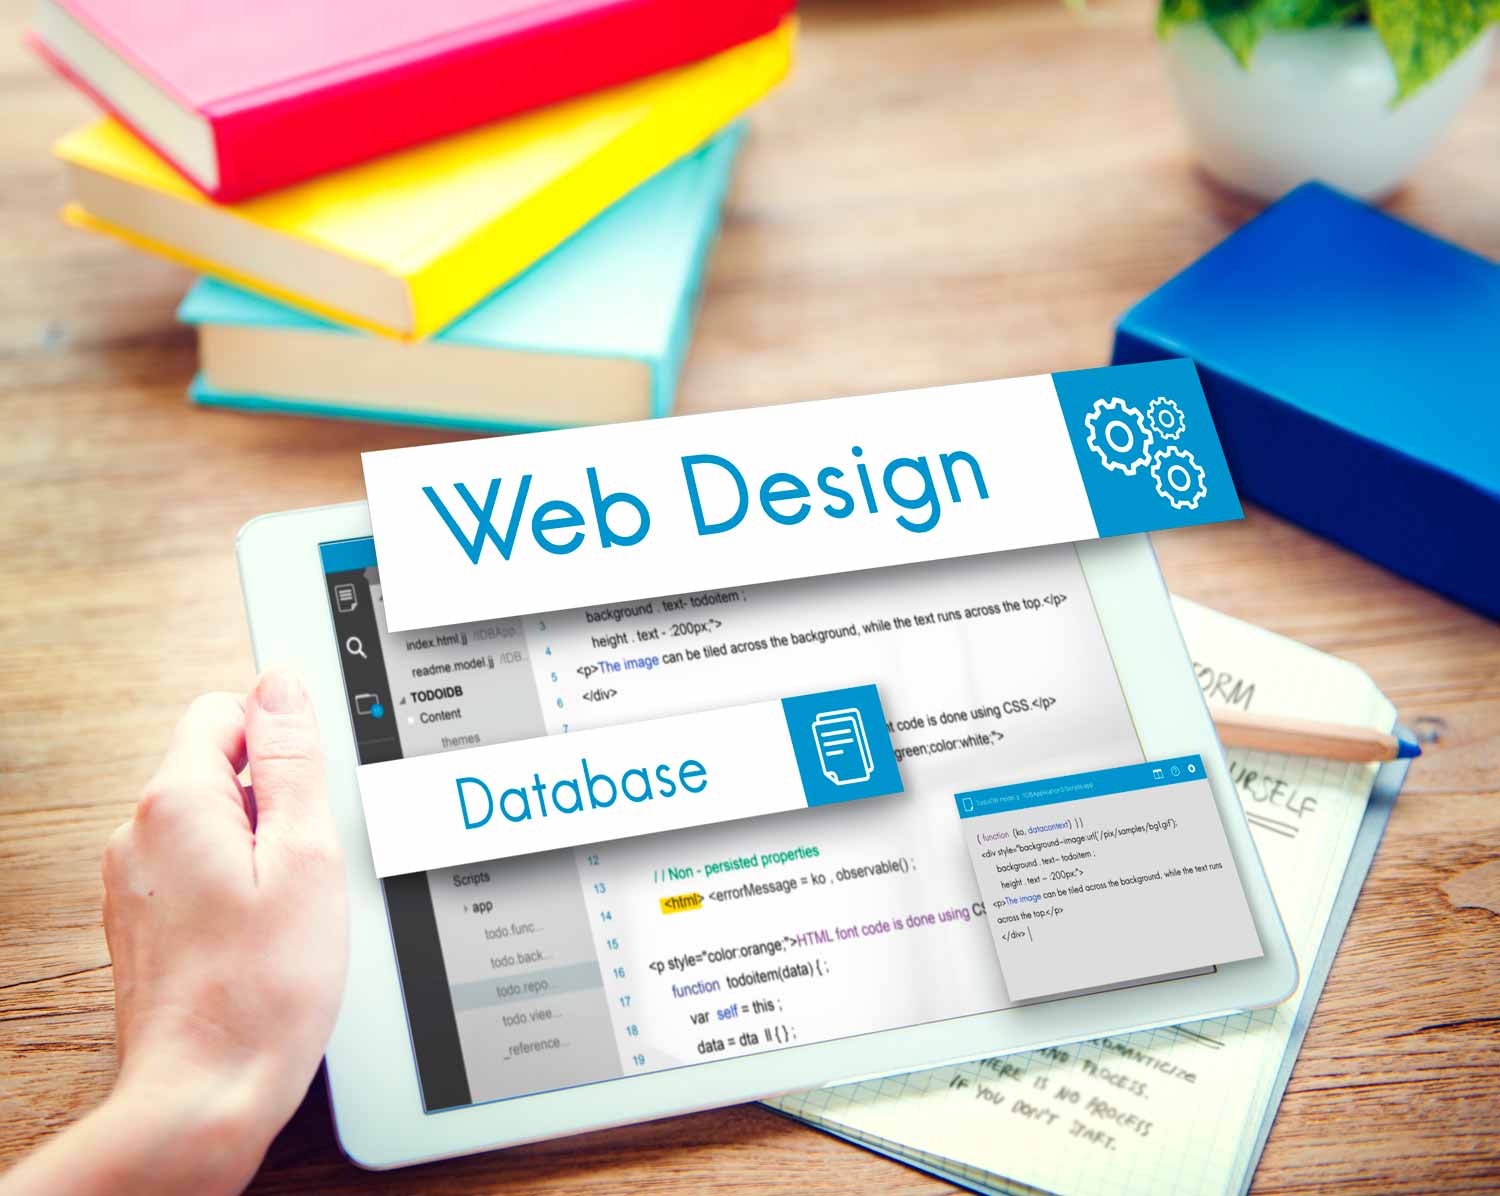 abbotsford website design agency can build you best web designs